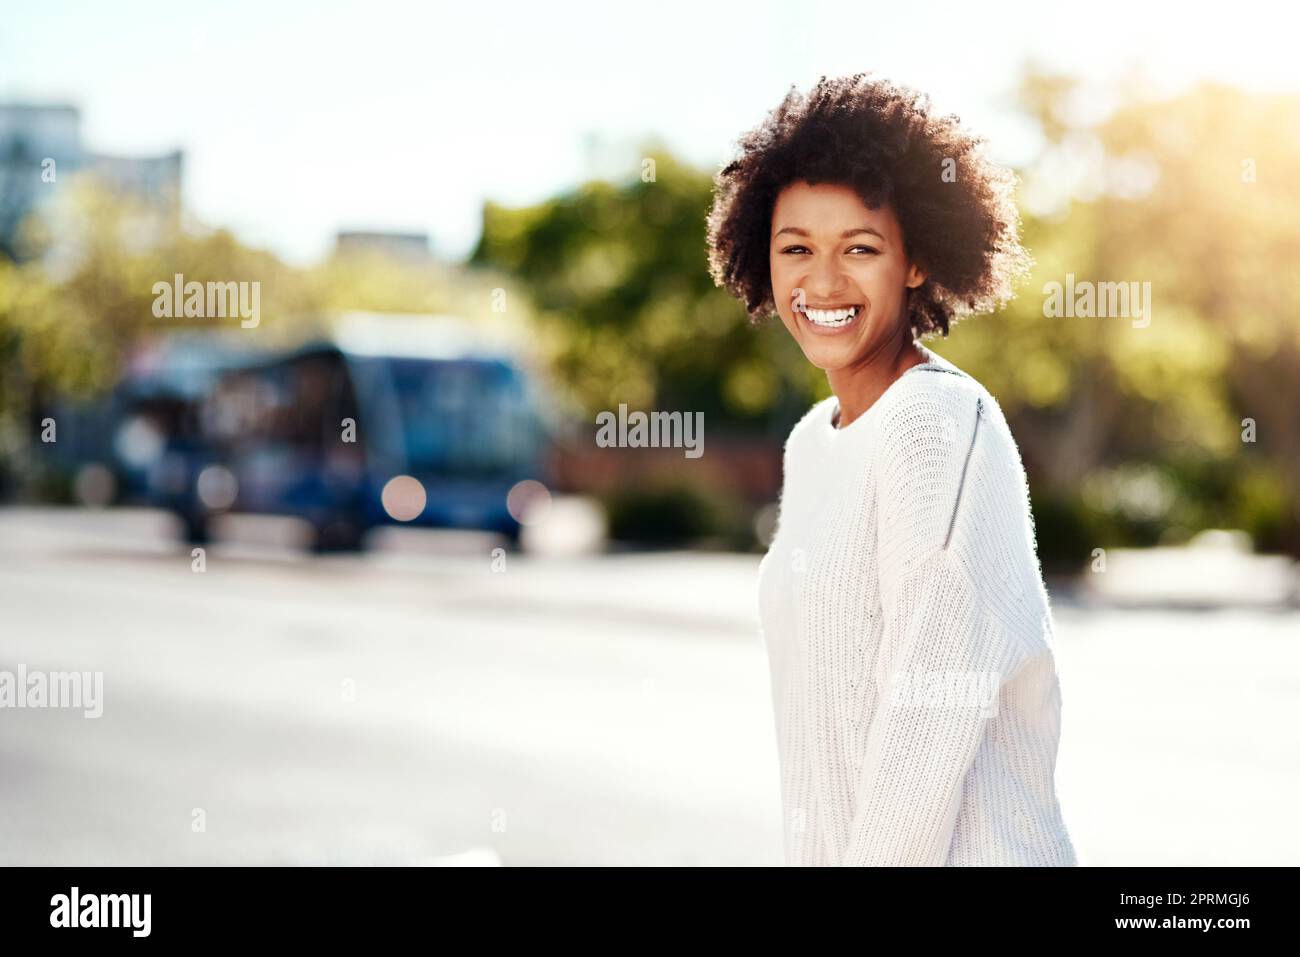 I know the city like the back of my hand. Portrait of an attractive young woman out and about in the city. Stock Photo